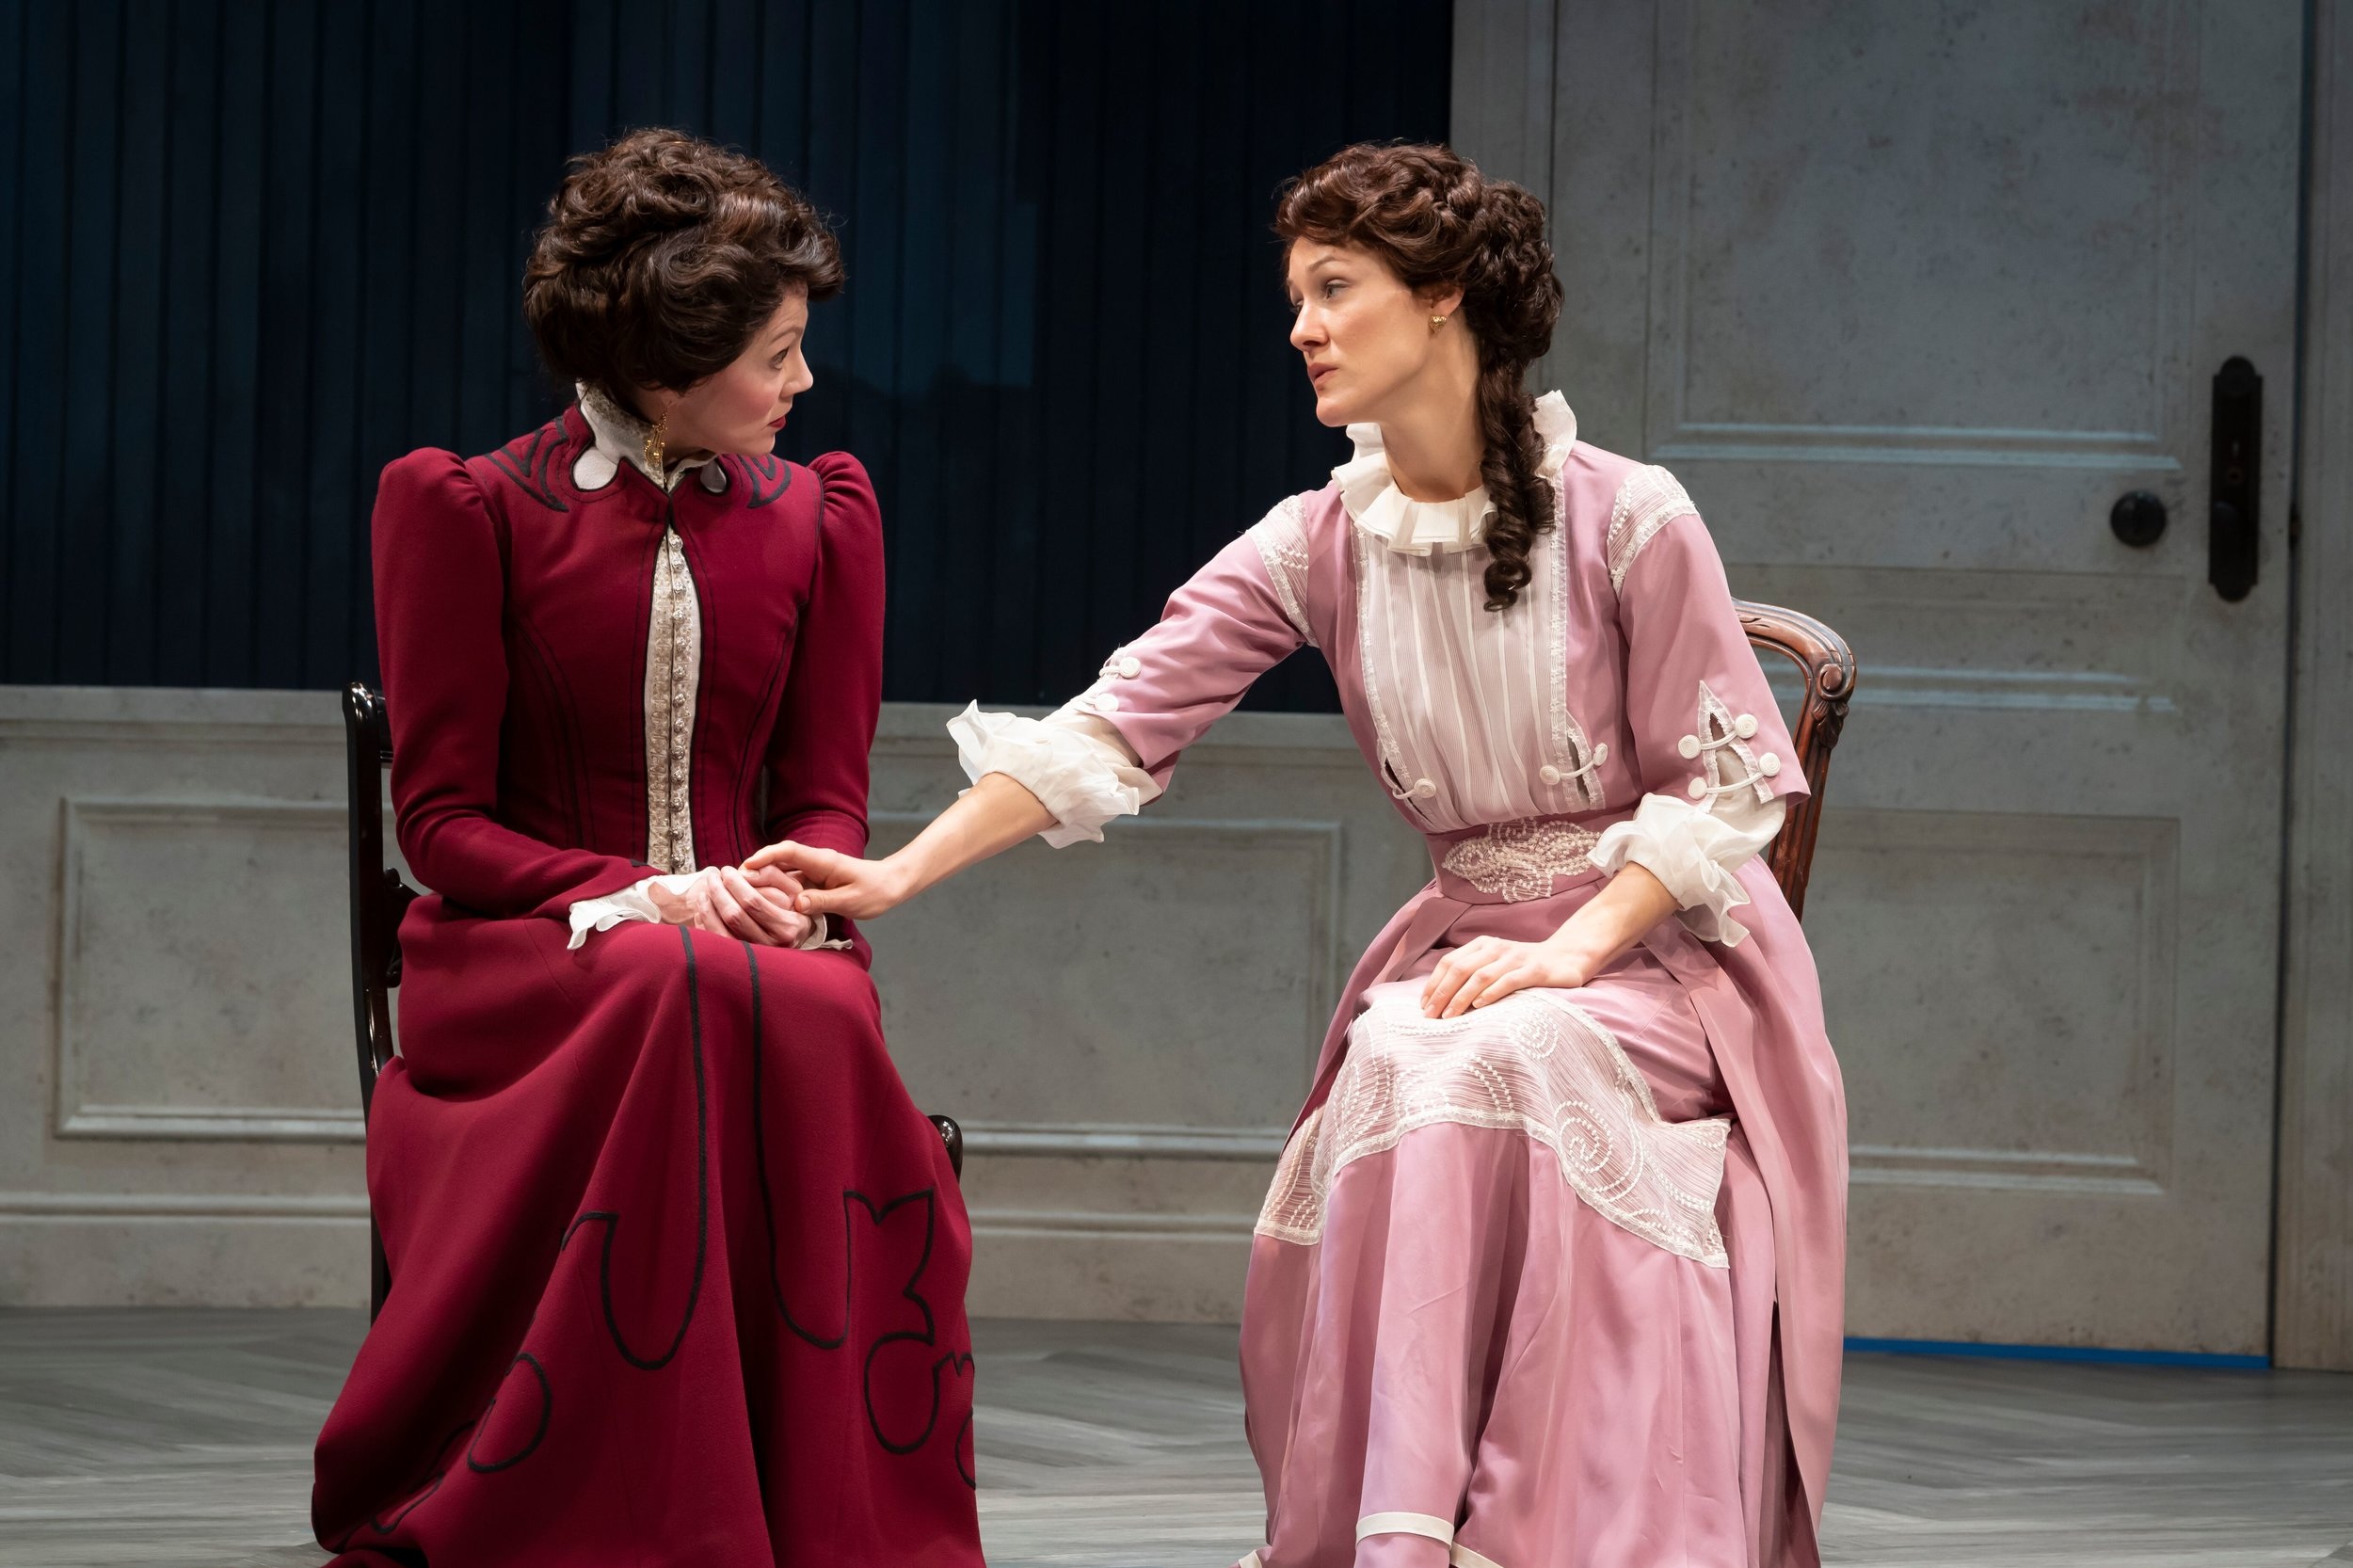  Kate Hampton and Olivia Osol in the Asolo Rep production of A Doll’s House, Part 2.  Photo by Cliff Roles 